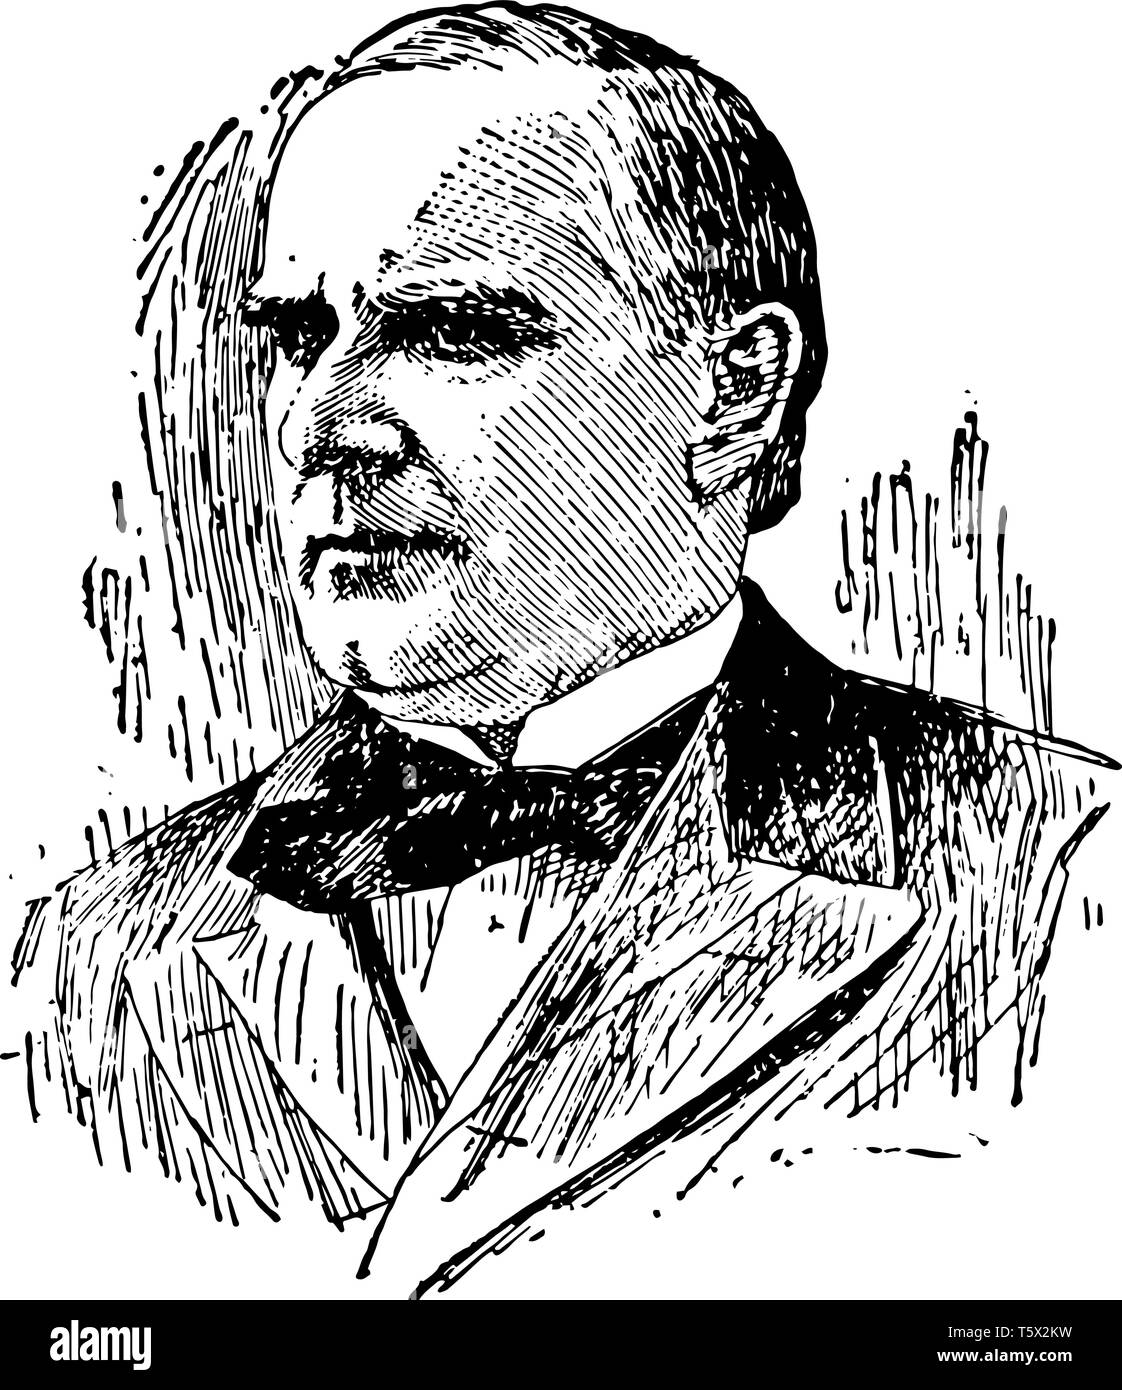 President William McKinley 1843 to 1901 he was the 25th president of the United States from 1897 to 1901 vintage line drawing or engraving illustratio Stock Vector